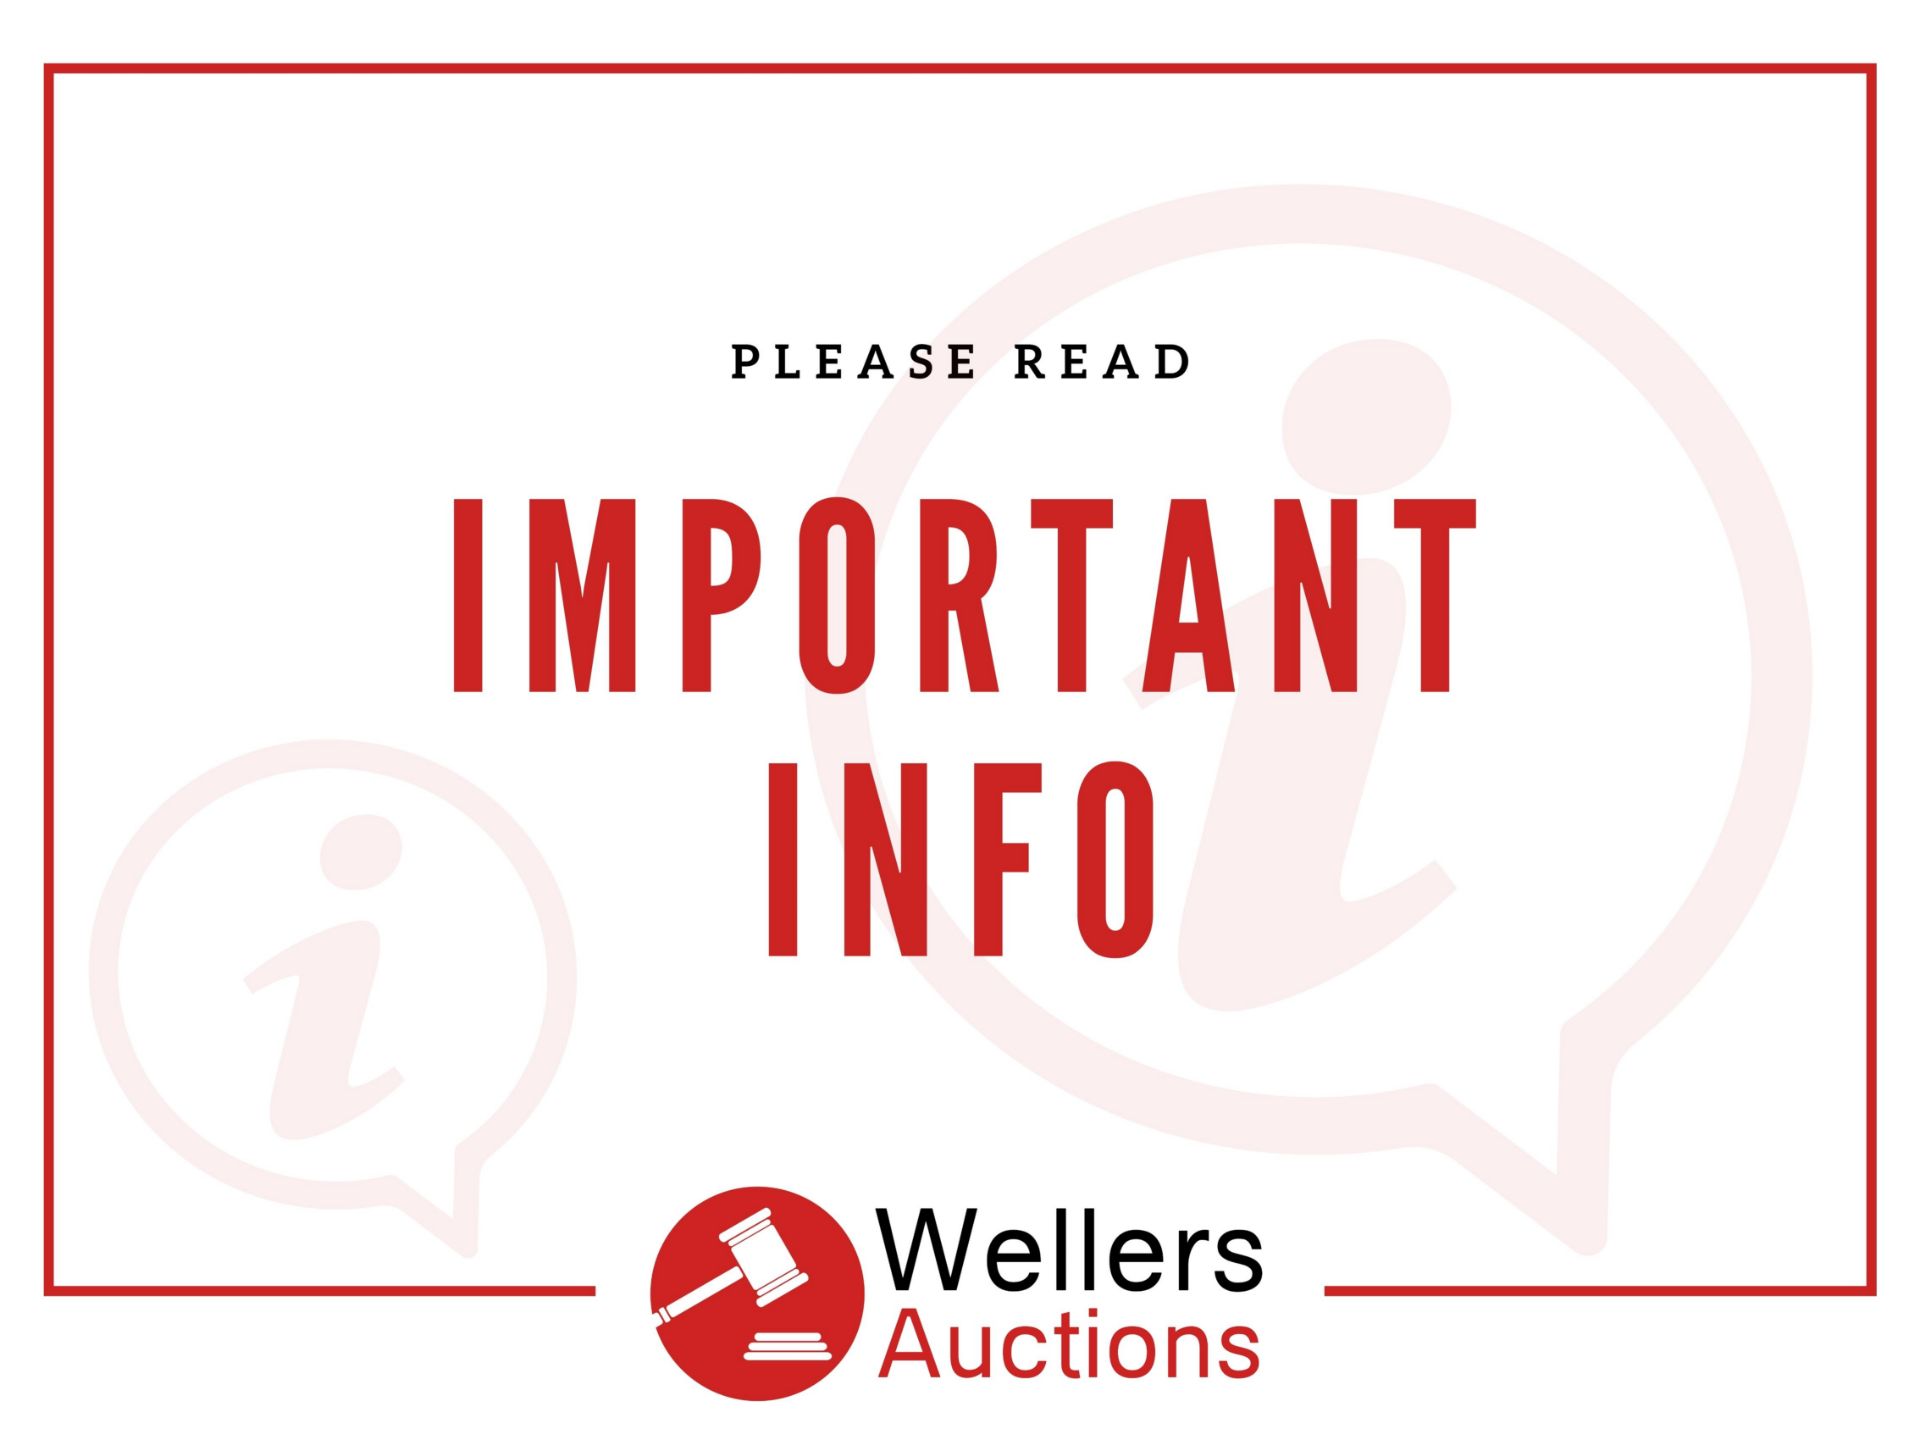 INFORMATION LOT: WELCOME TO THIS SEMI-RETIREMENT AUCTION ON BEHALF OF ROY ROBERTS AND NEWBRIDGE STO